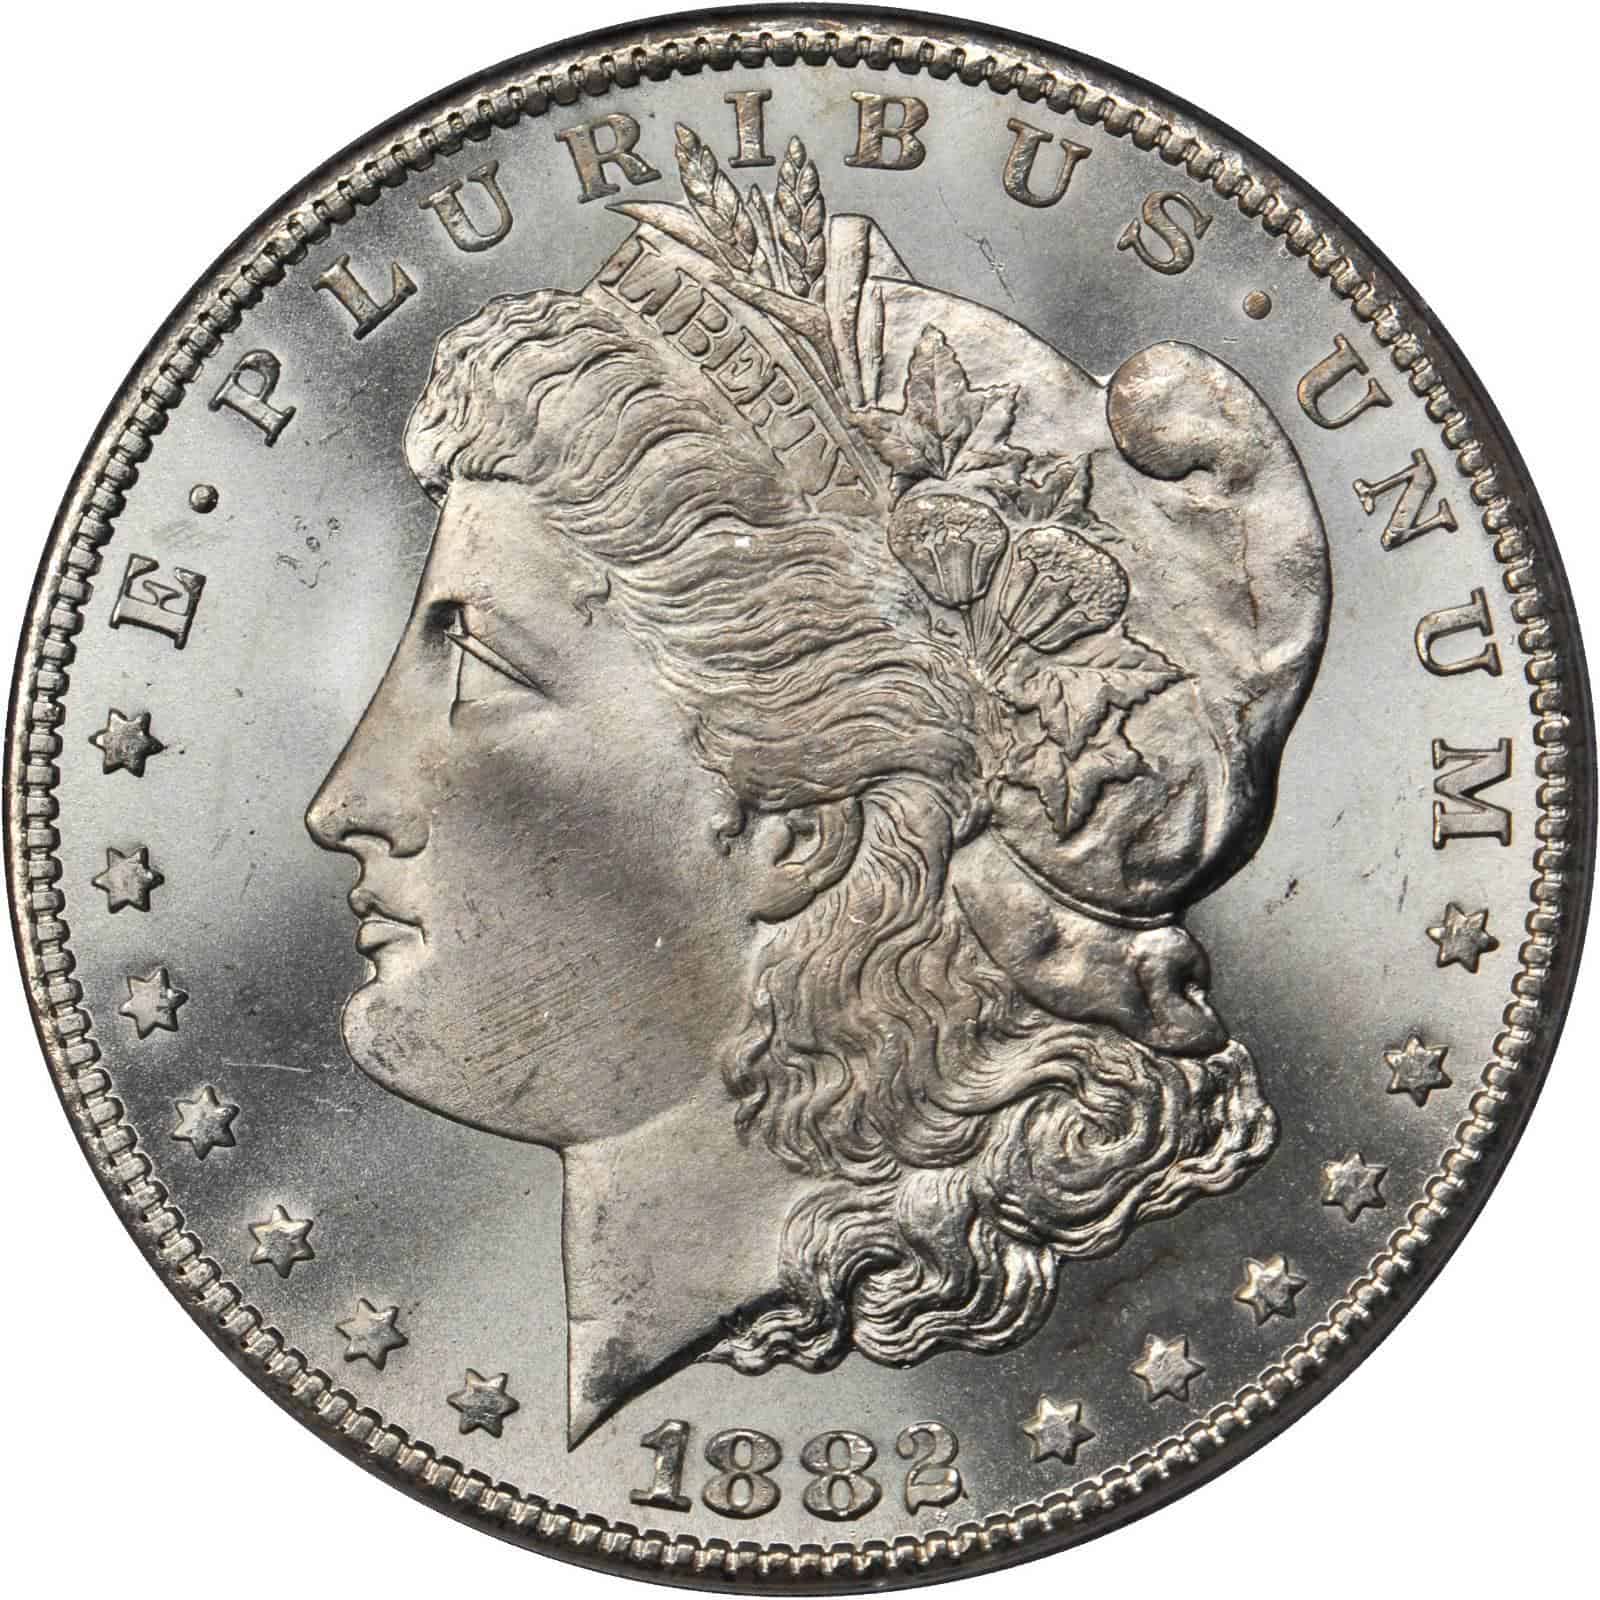 The obverse of the 1882 Morgan silver dollar